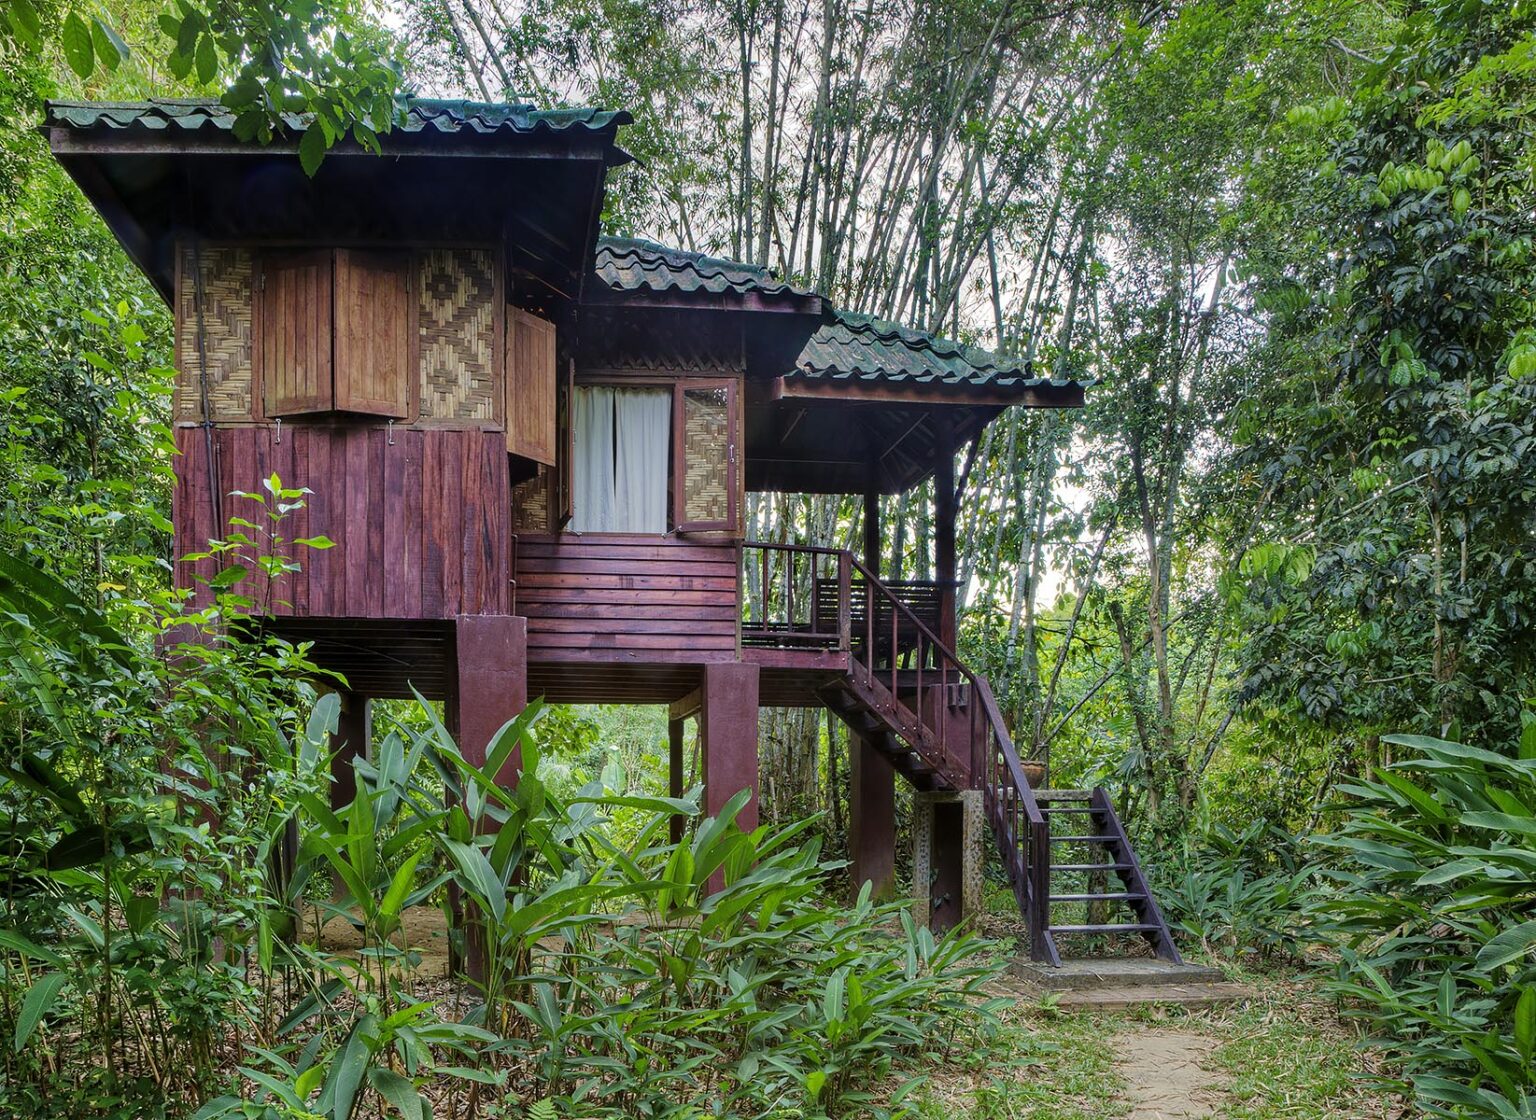 TREE HOUSES are the specialty of OUR JUNGLE HOUSE a lodge in the rainforest near KHAO SOK NATIONAL PARK - SURATHANI PROVENCE, THAILAND